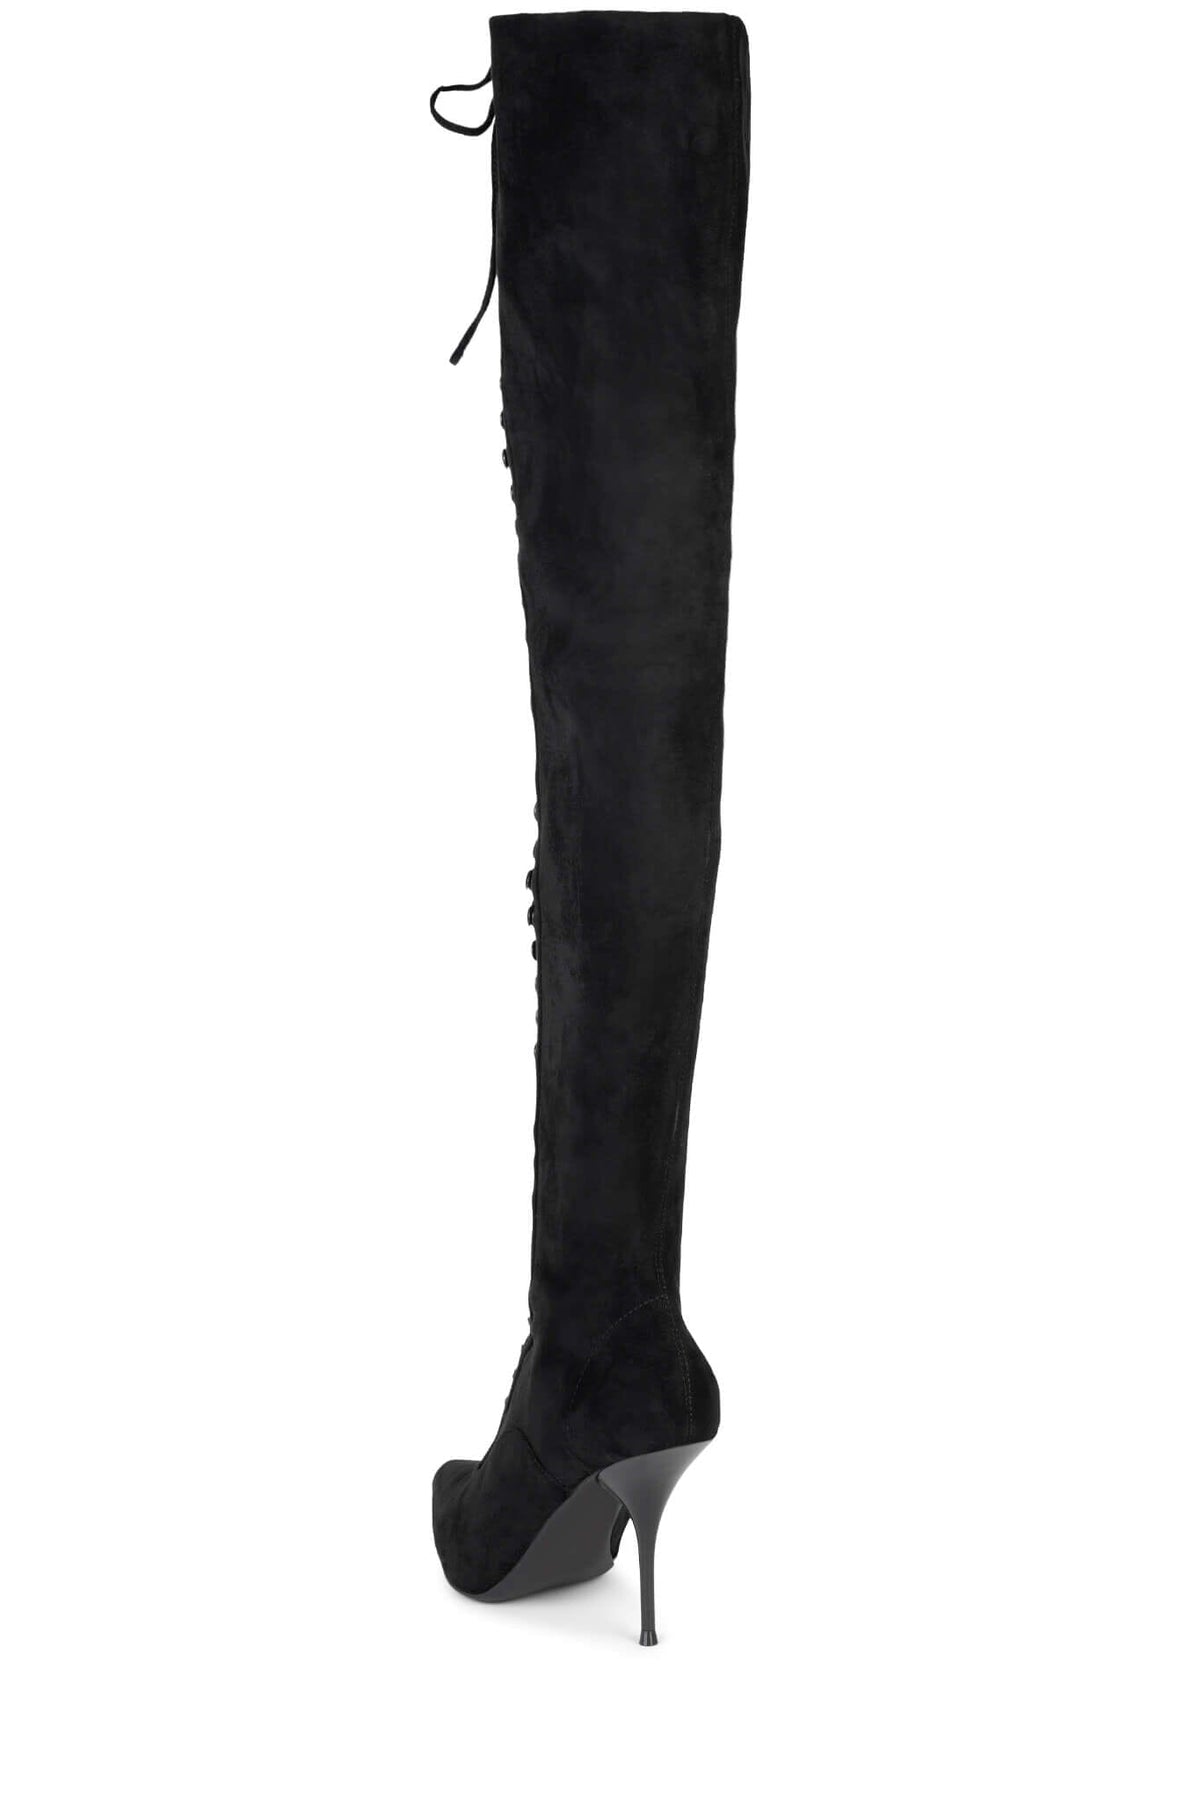 BURNED Thigh-High Boot RB 